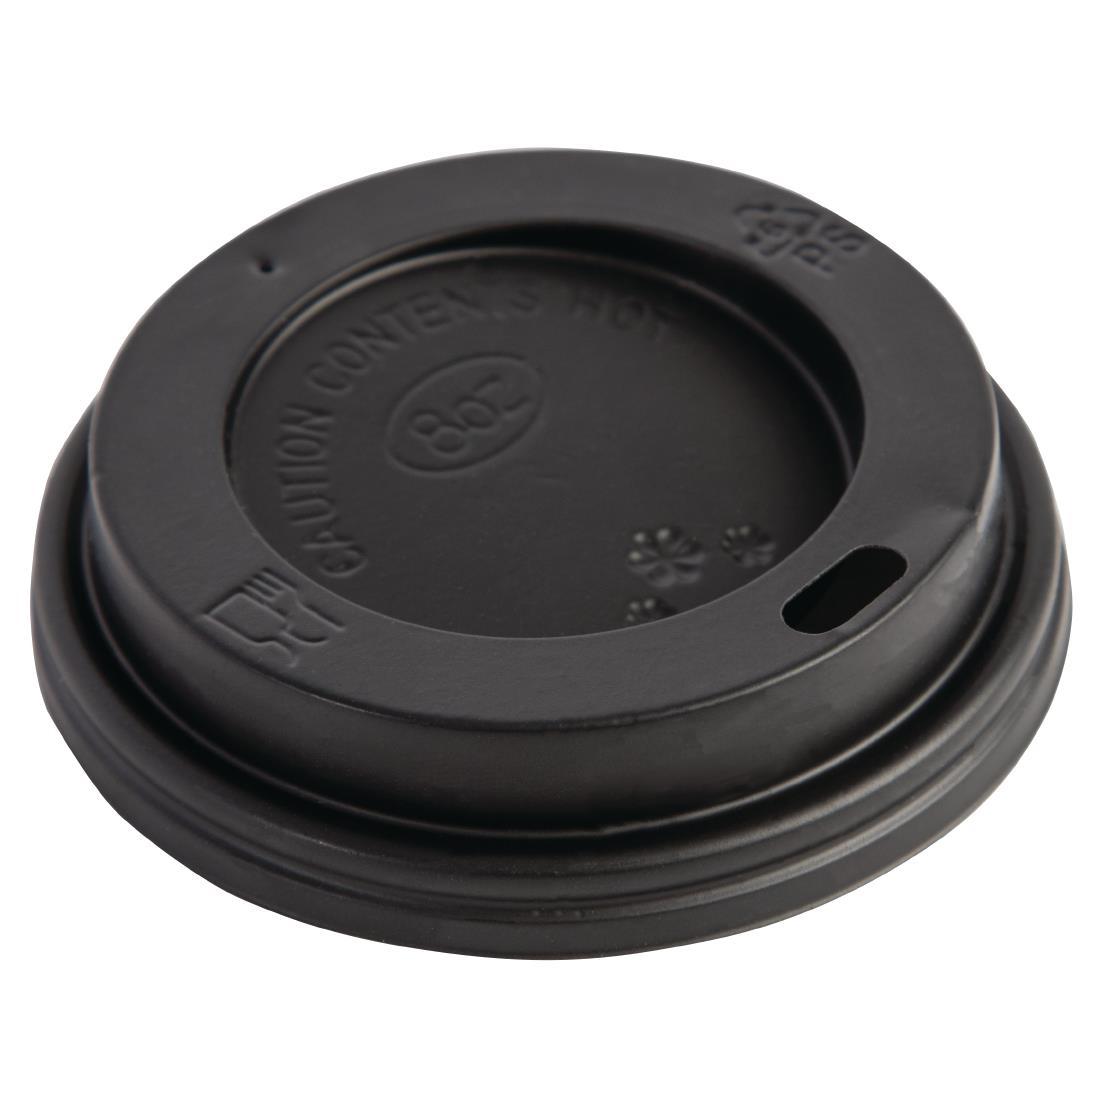 Fiesta Recyclable Coffee Cup Lids Black 225ml / 8oz (Pack of 50) - CW715  - 1